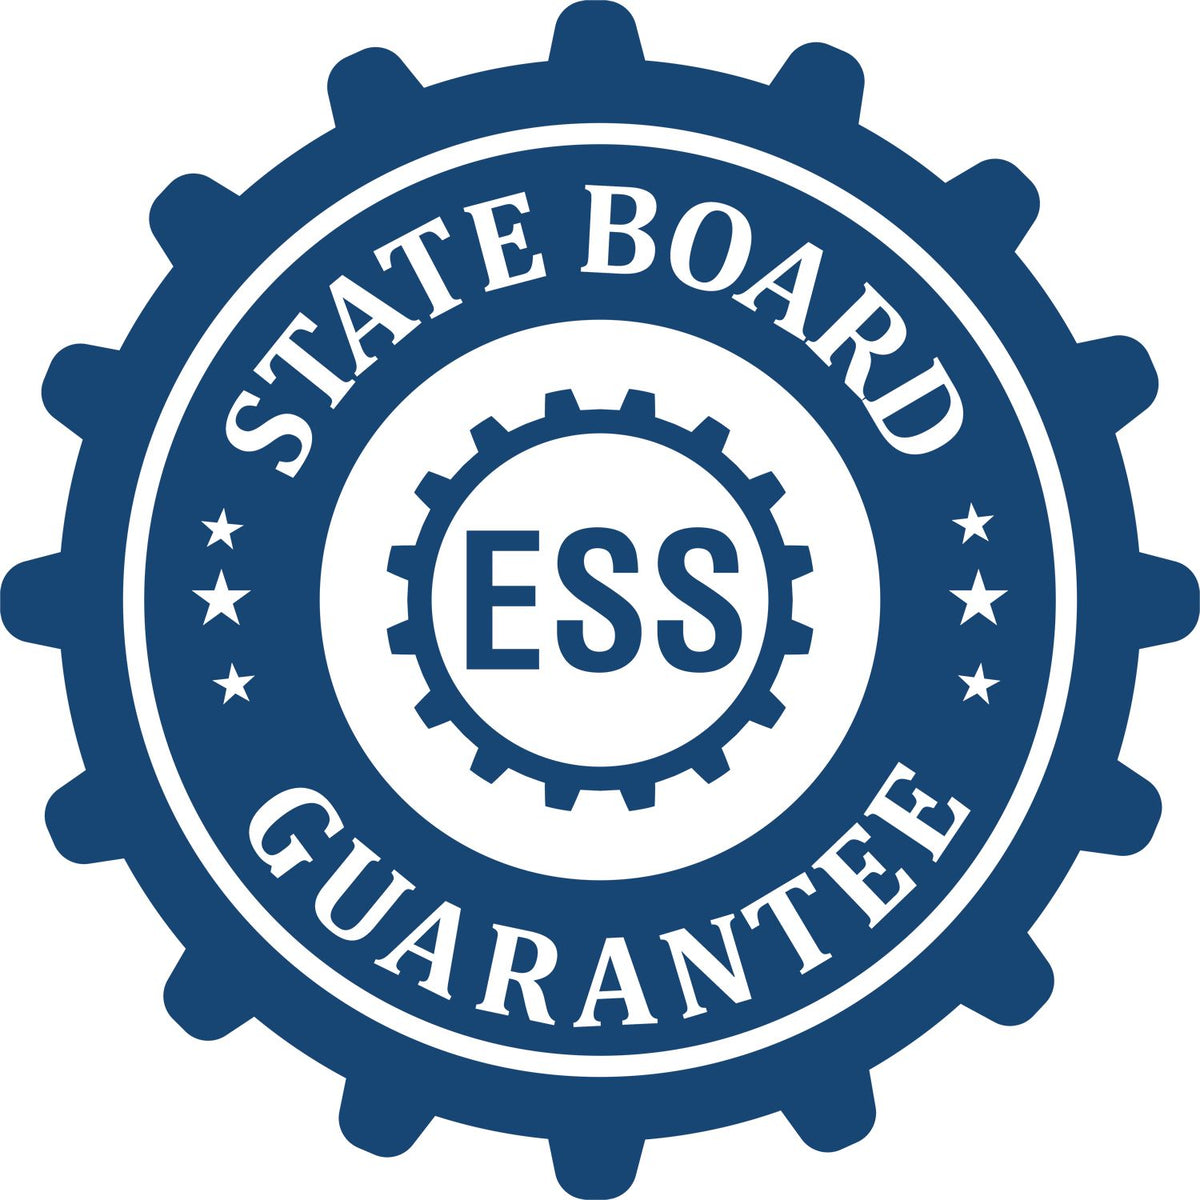 An emblem in a gear shape illustrating a state board guarantee for the Hybrid Louisiana Architect Seal